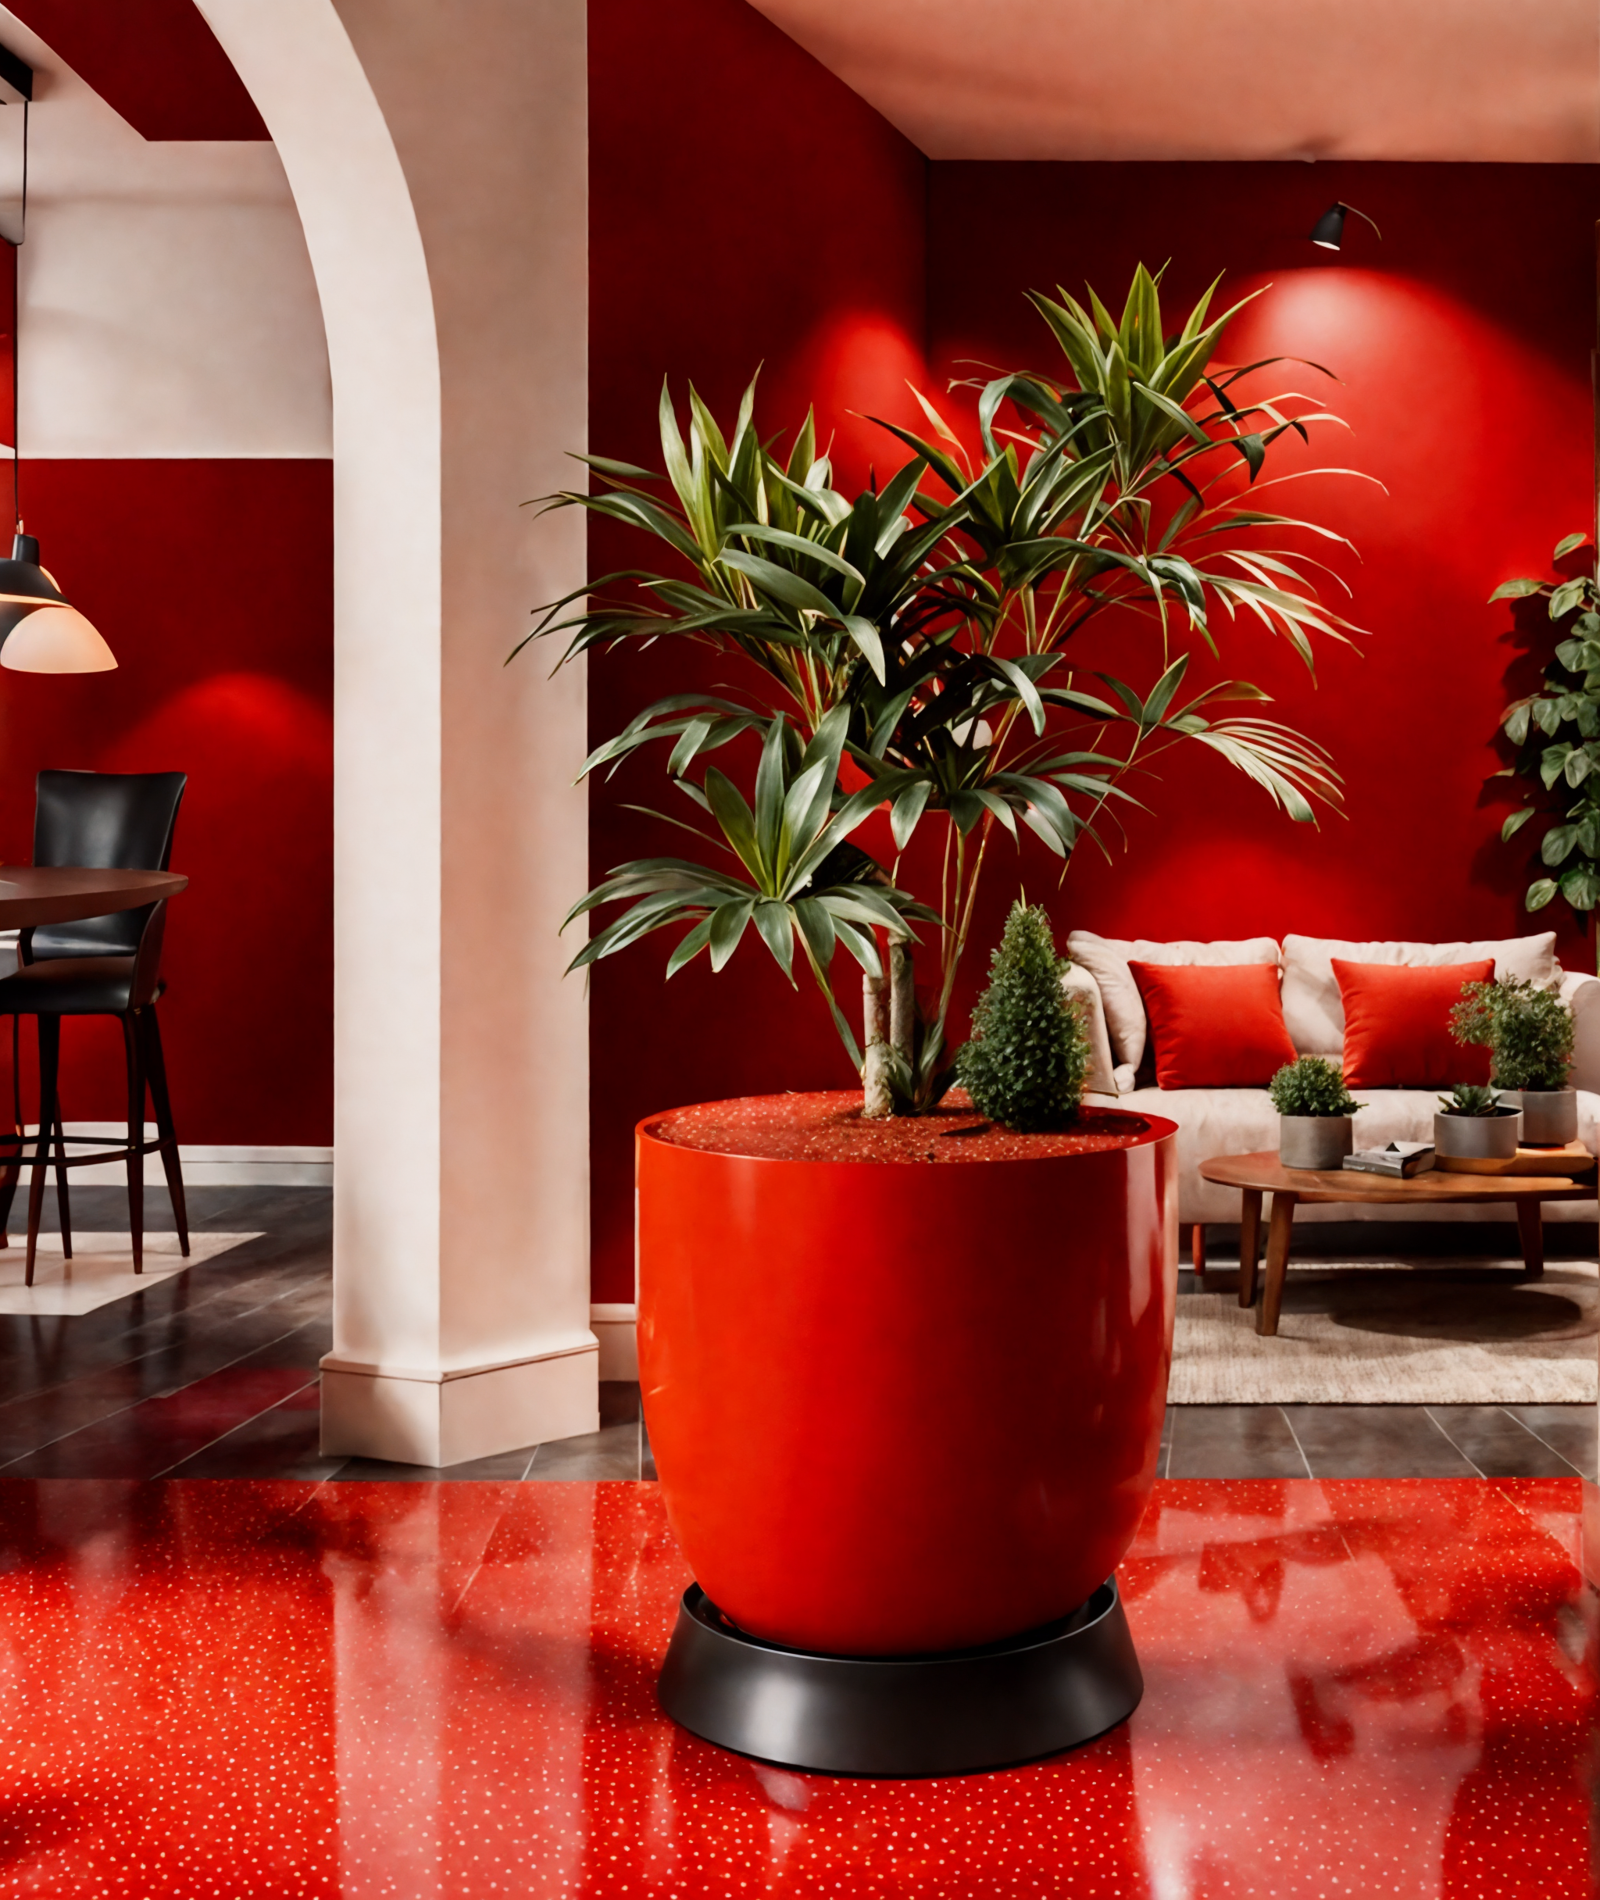 Howea forsteriana in a red vase, with neutral-toned decor and clear lighting.